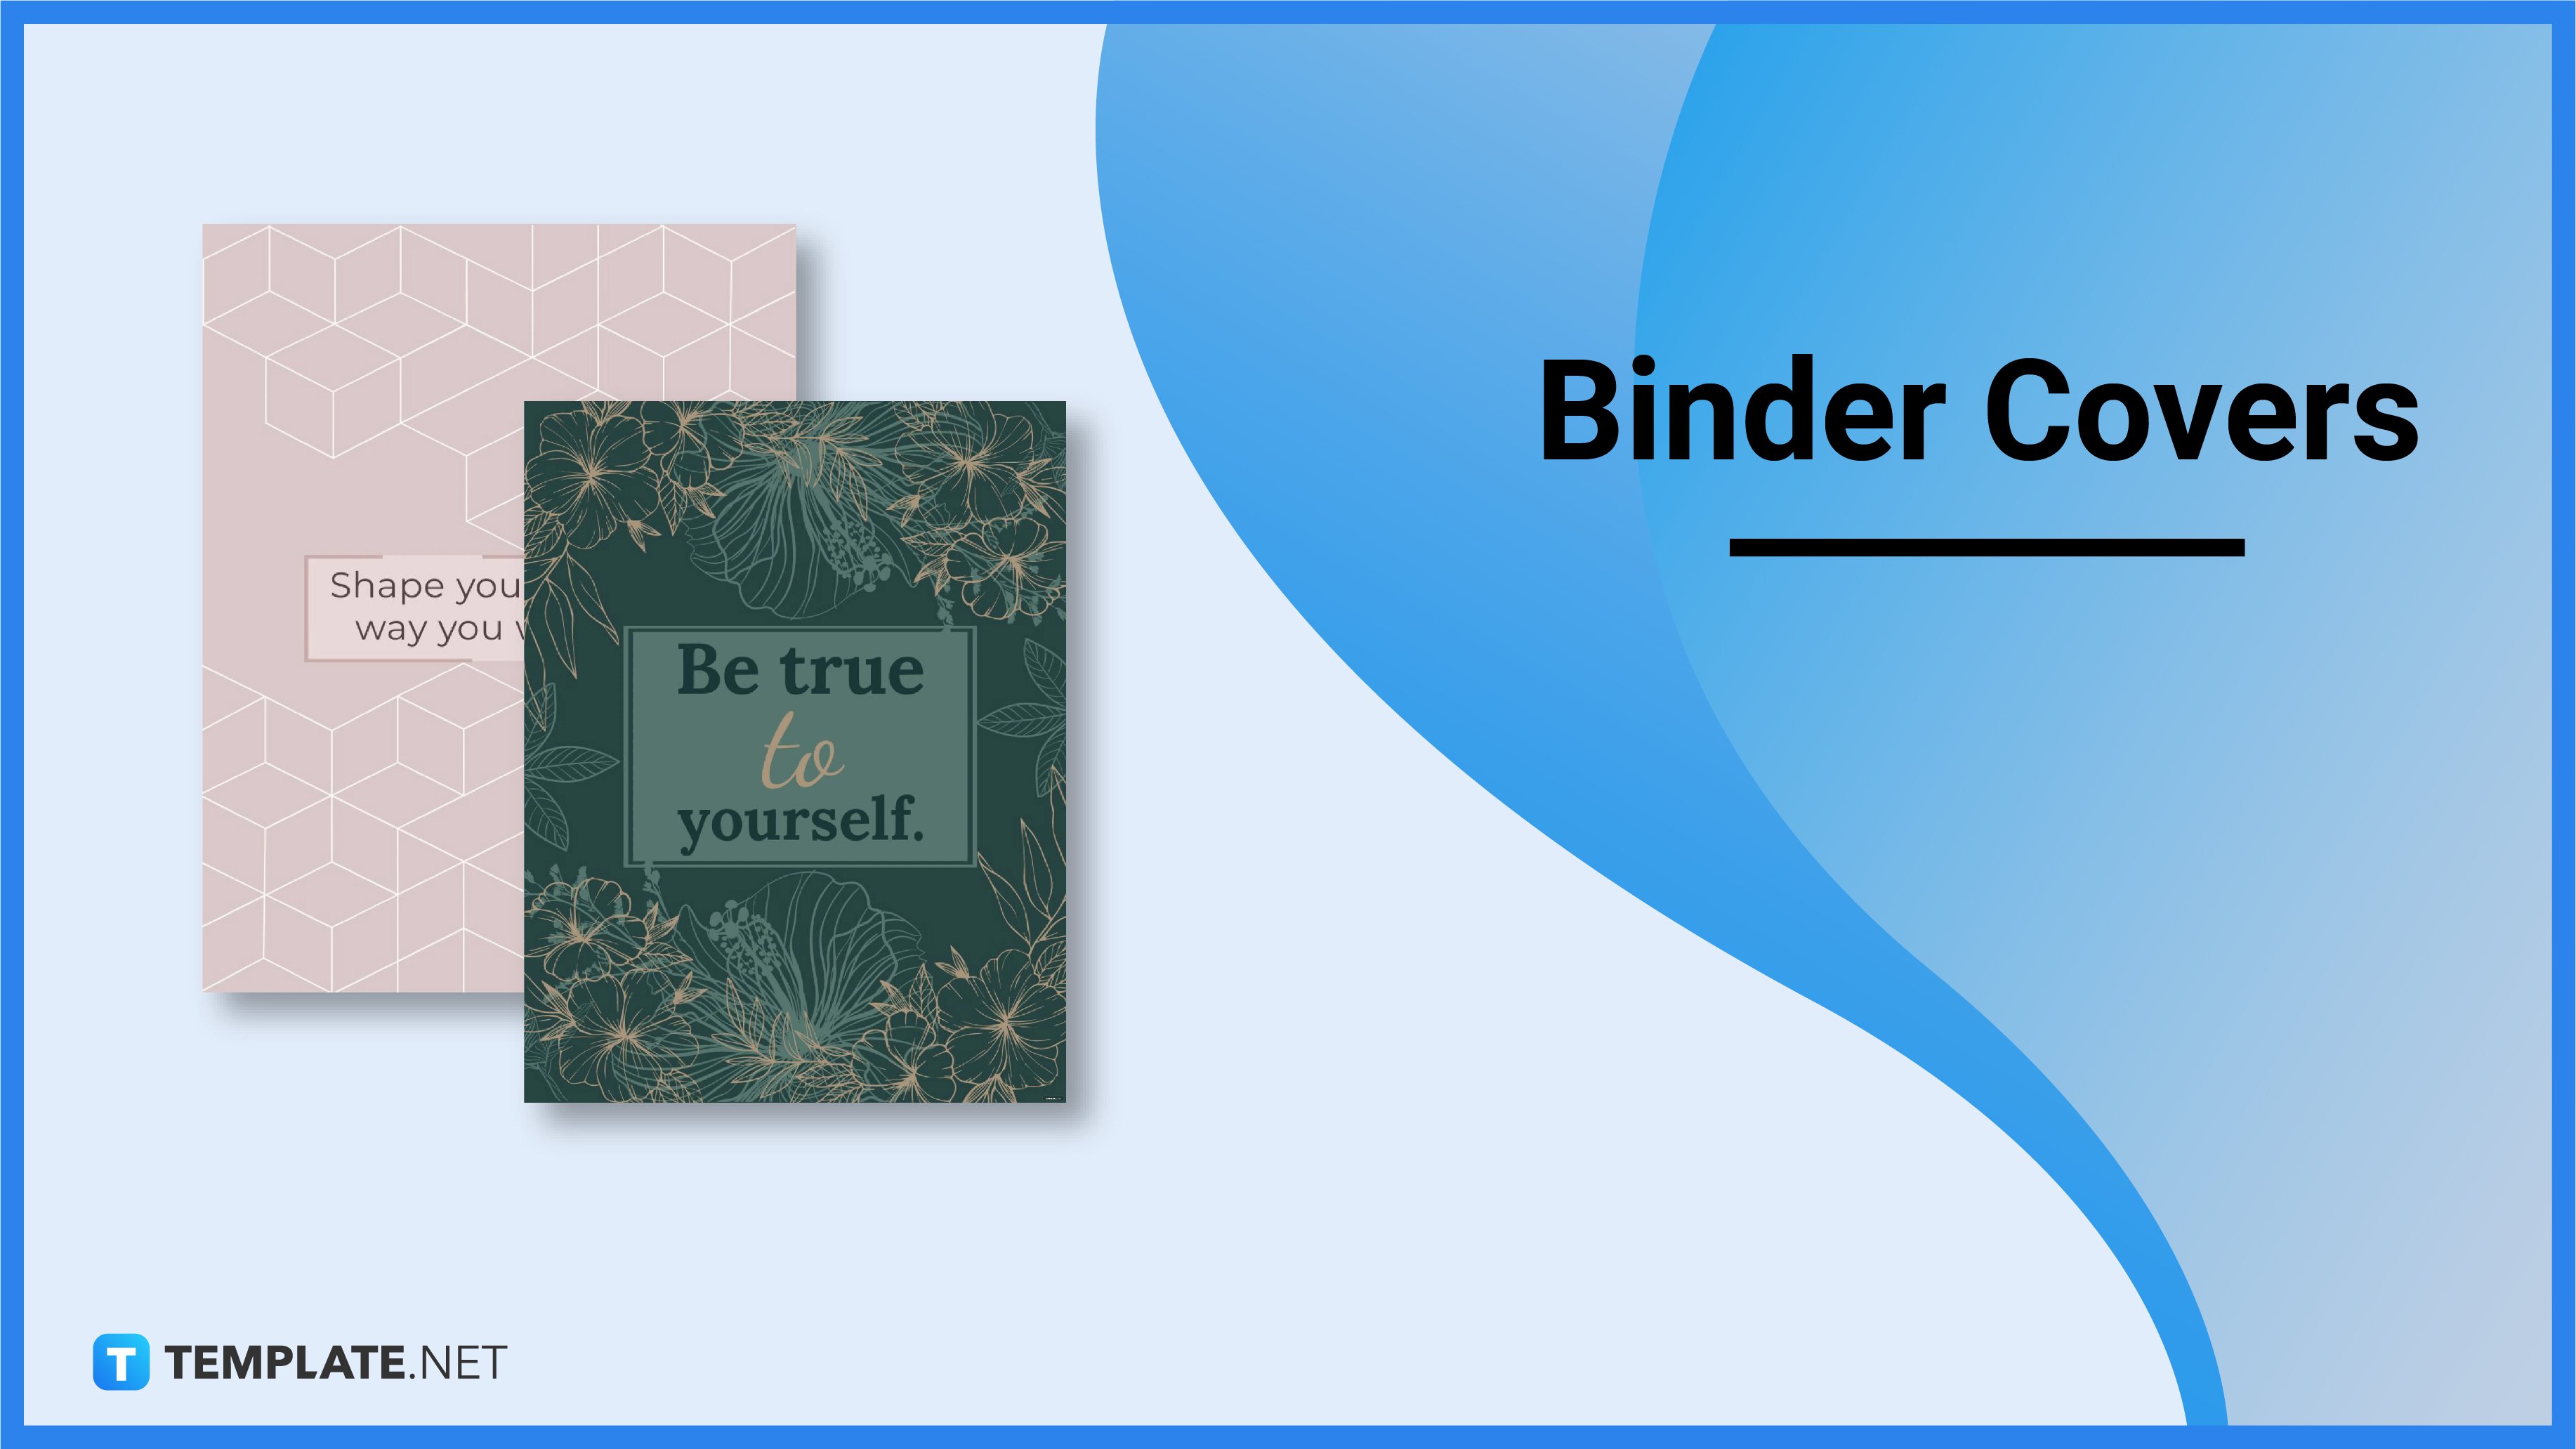 Binder Covers 